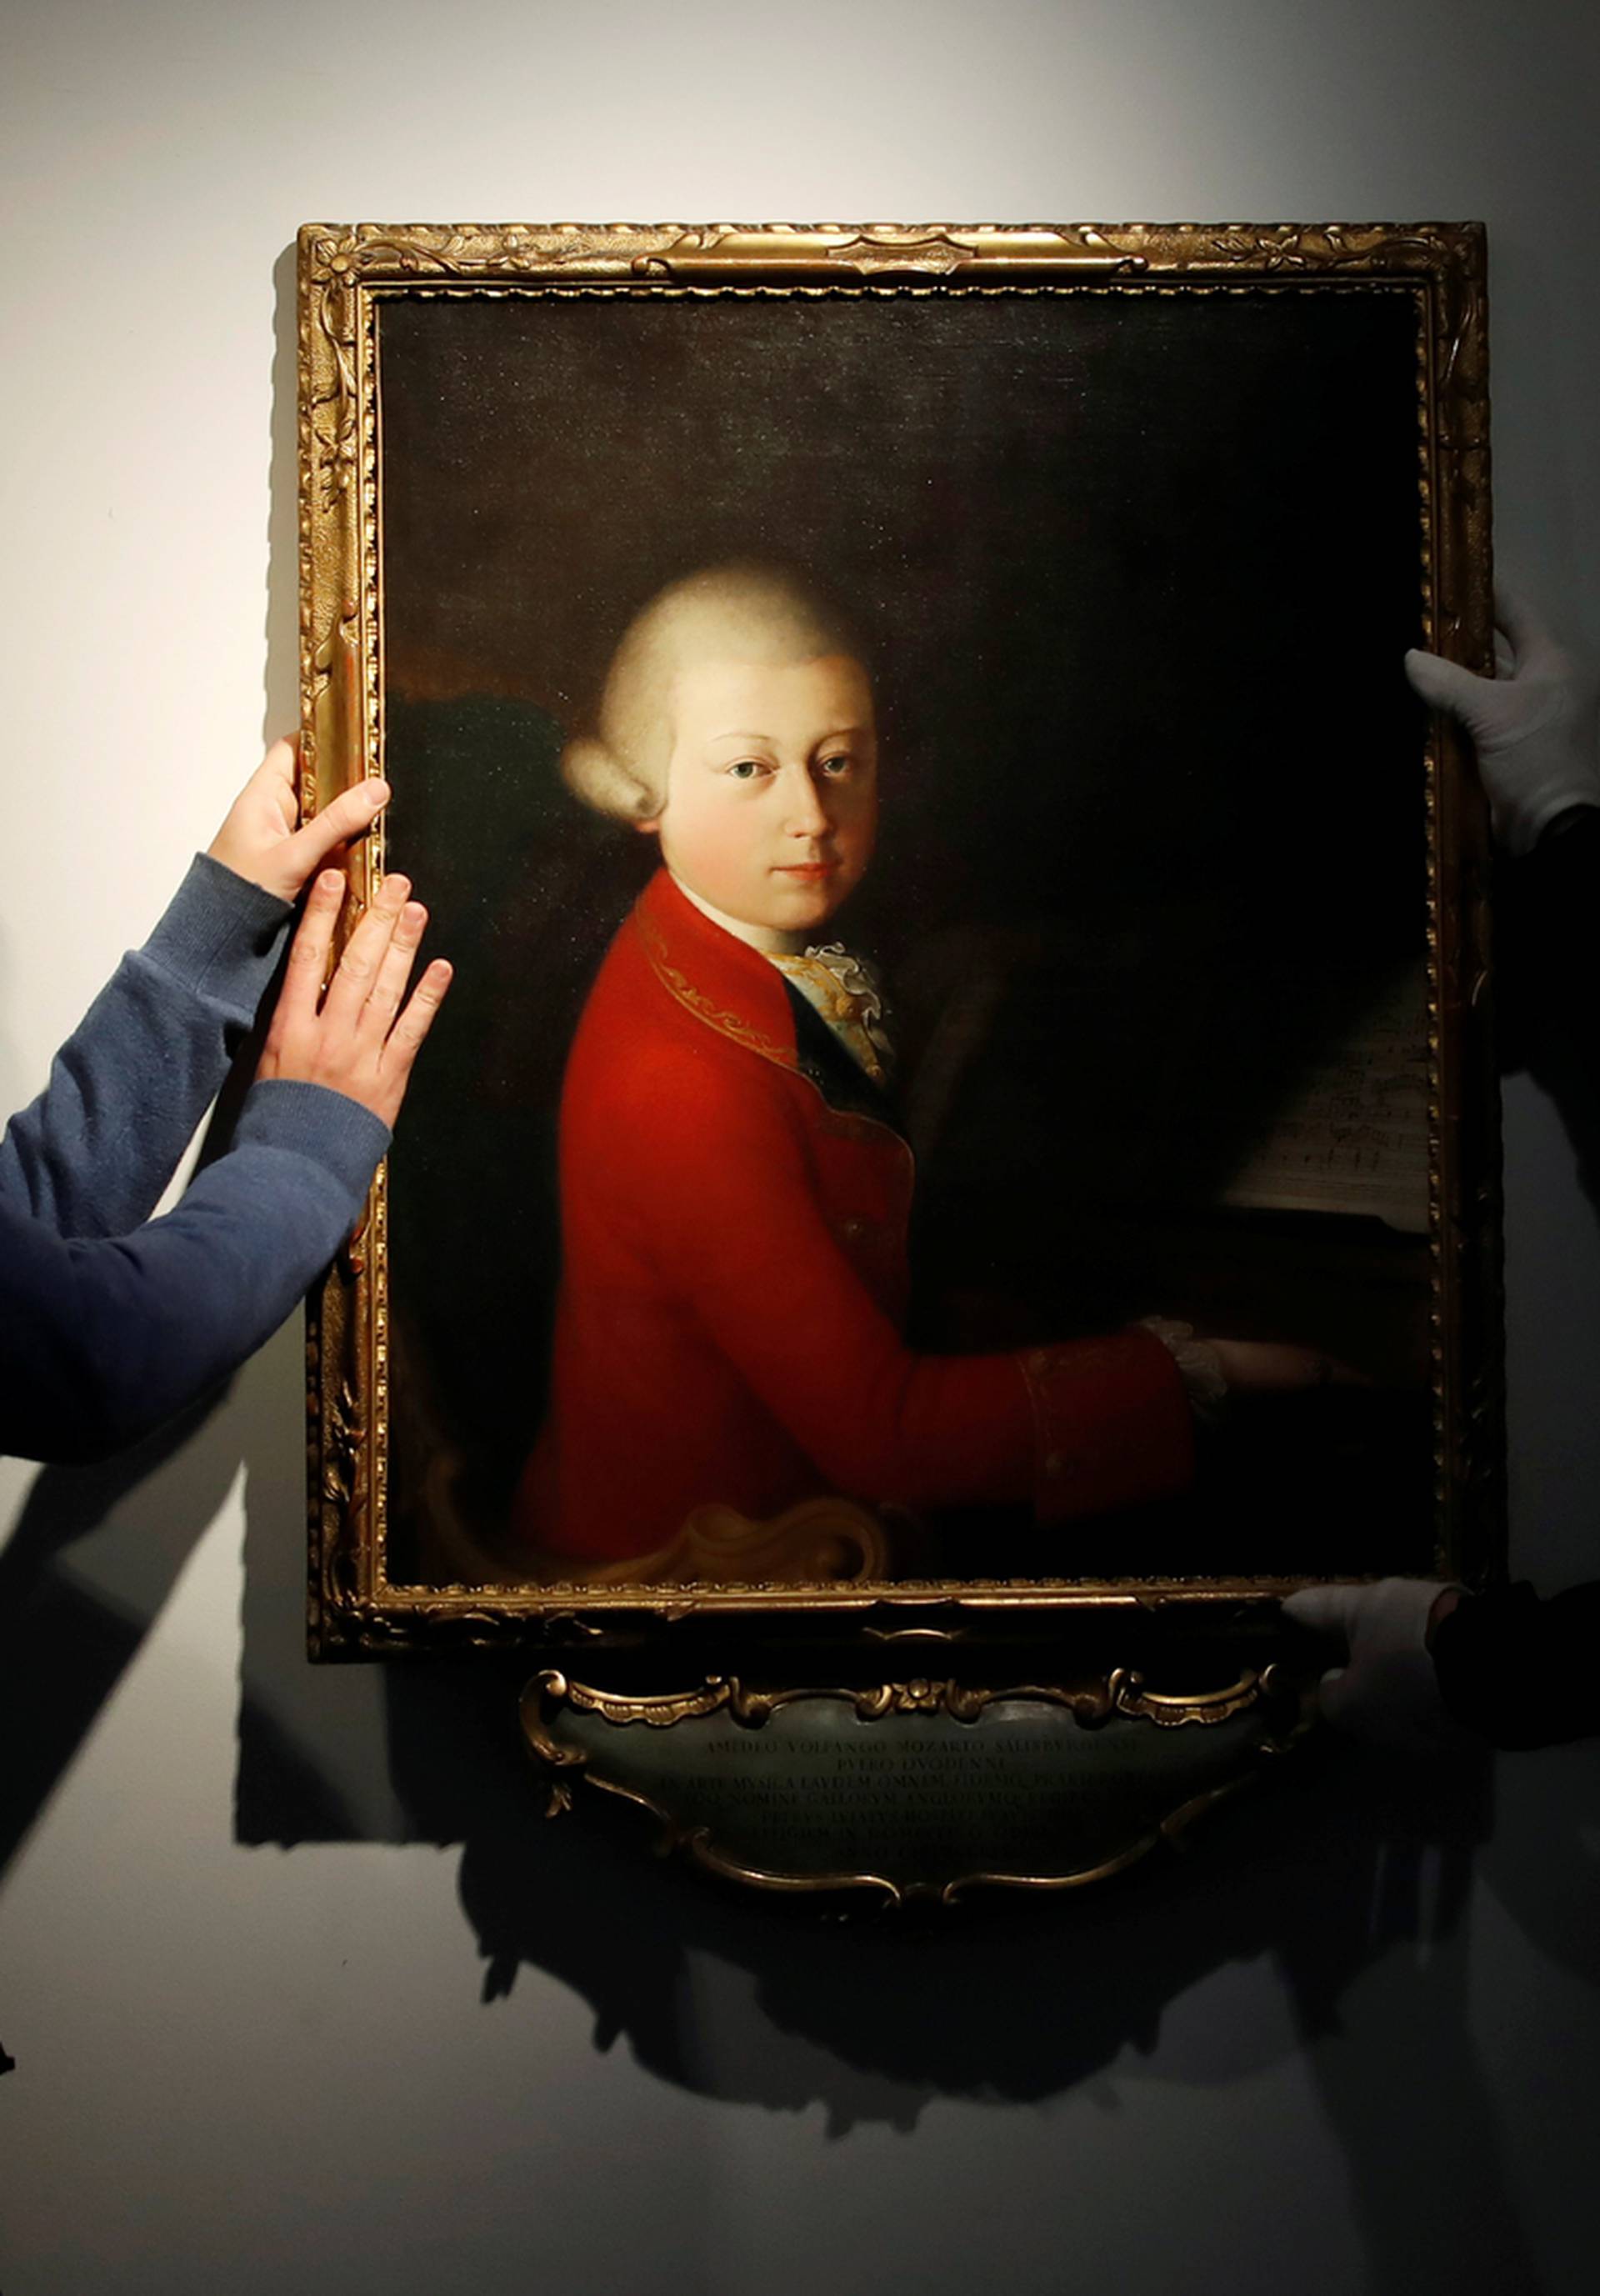 Workers install a portrait due to be sold at auction by Christie's in Paris which depicts composer Wolfgang Amadeus Mozart